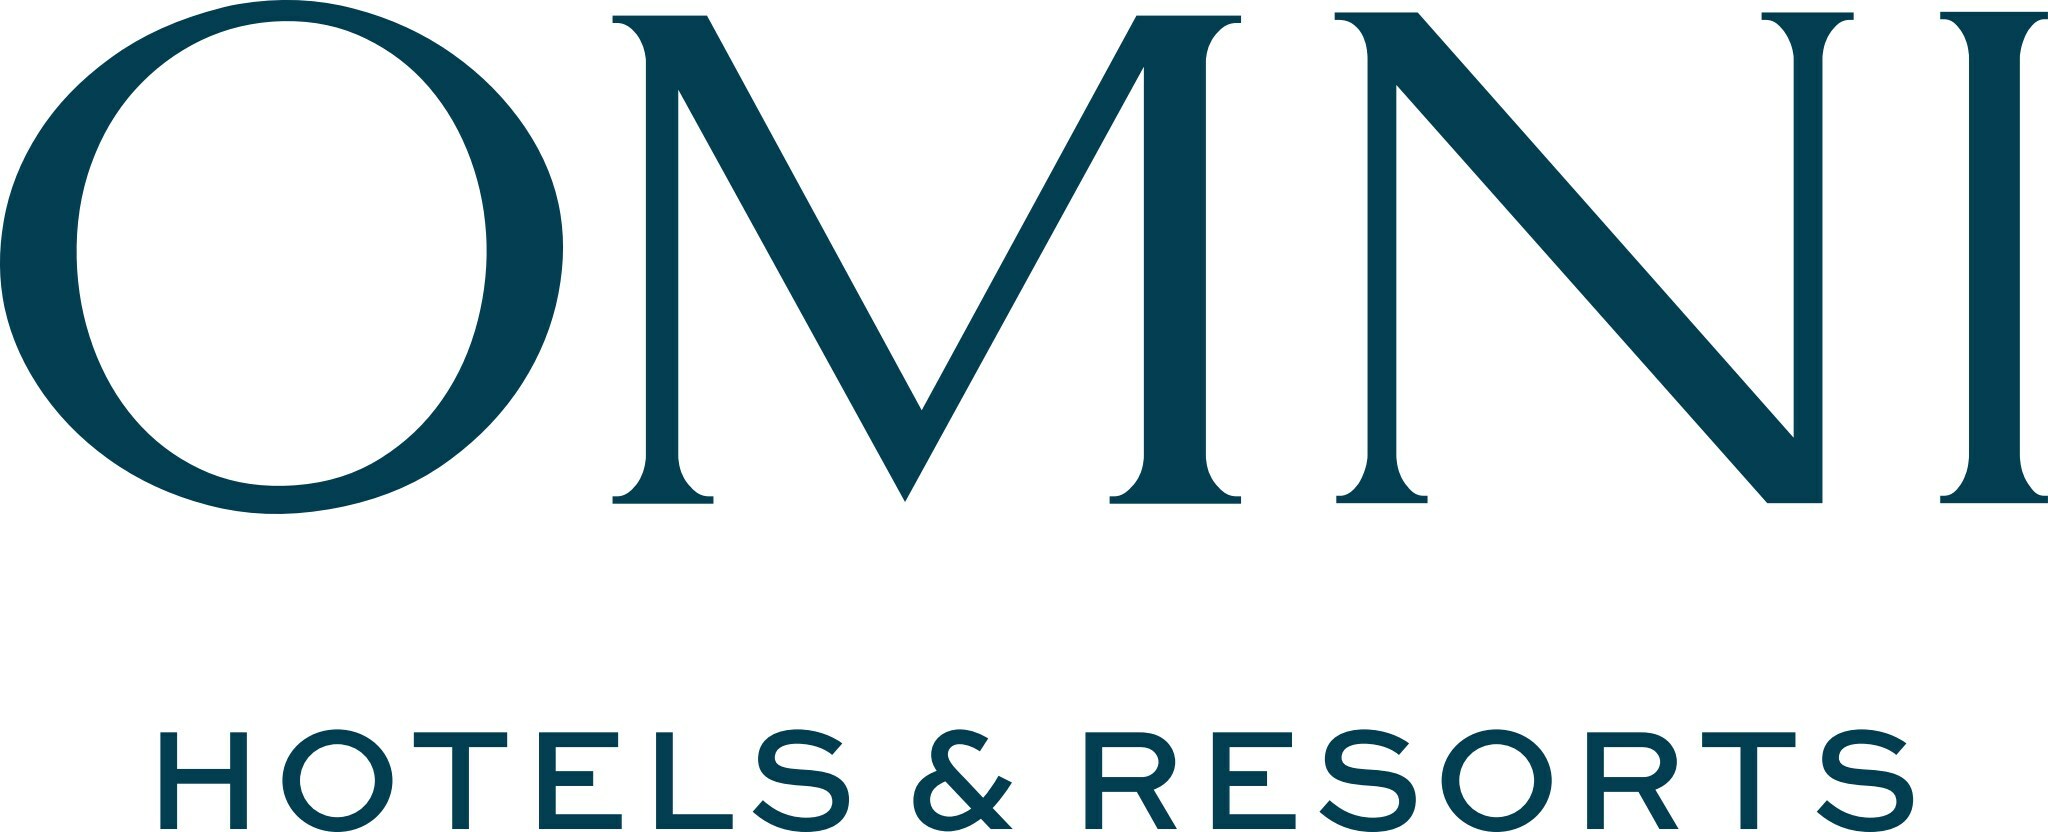 Omni Hotels & Resorts Appoints